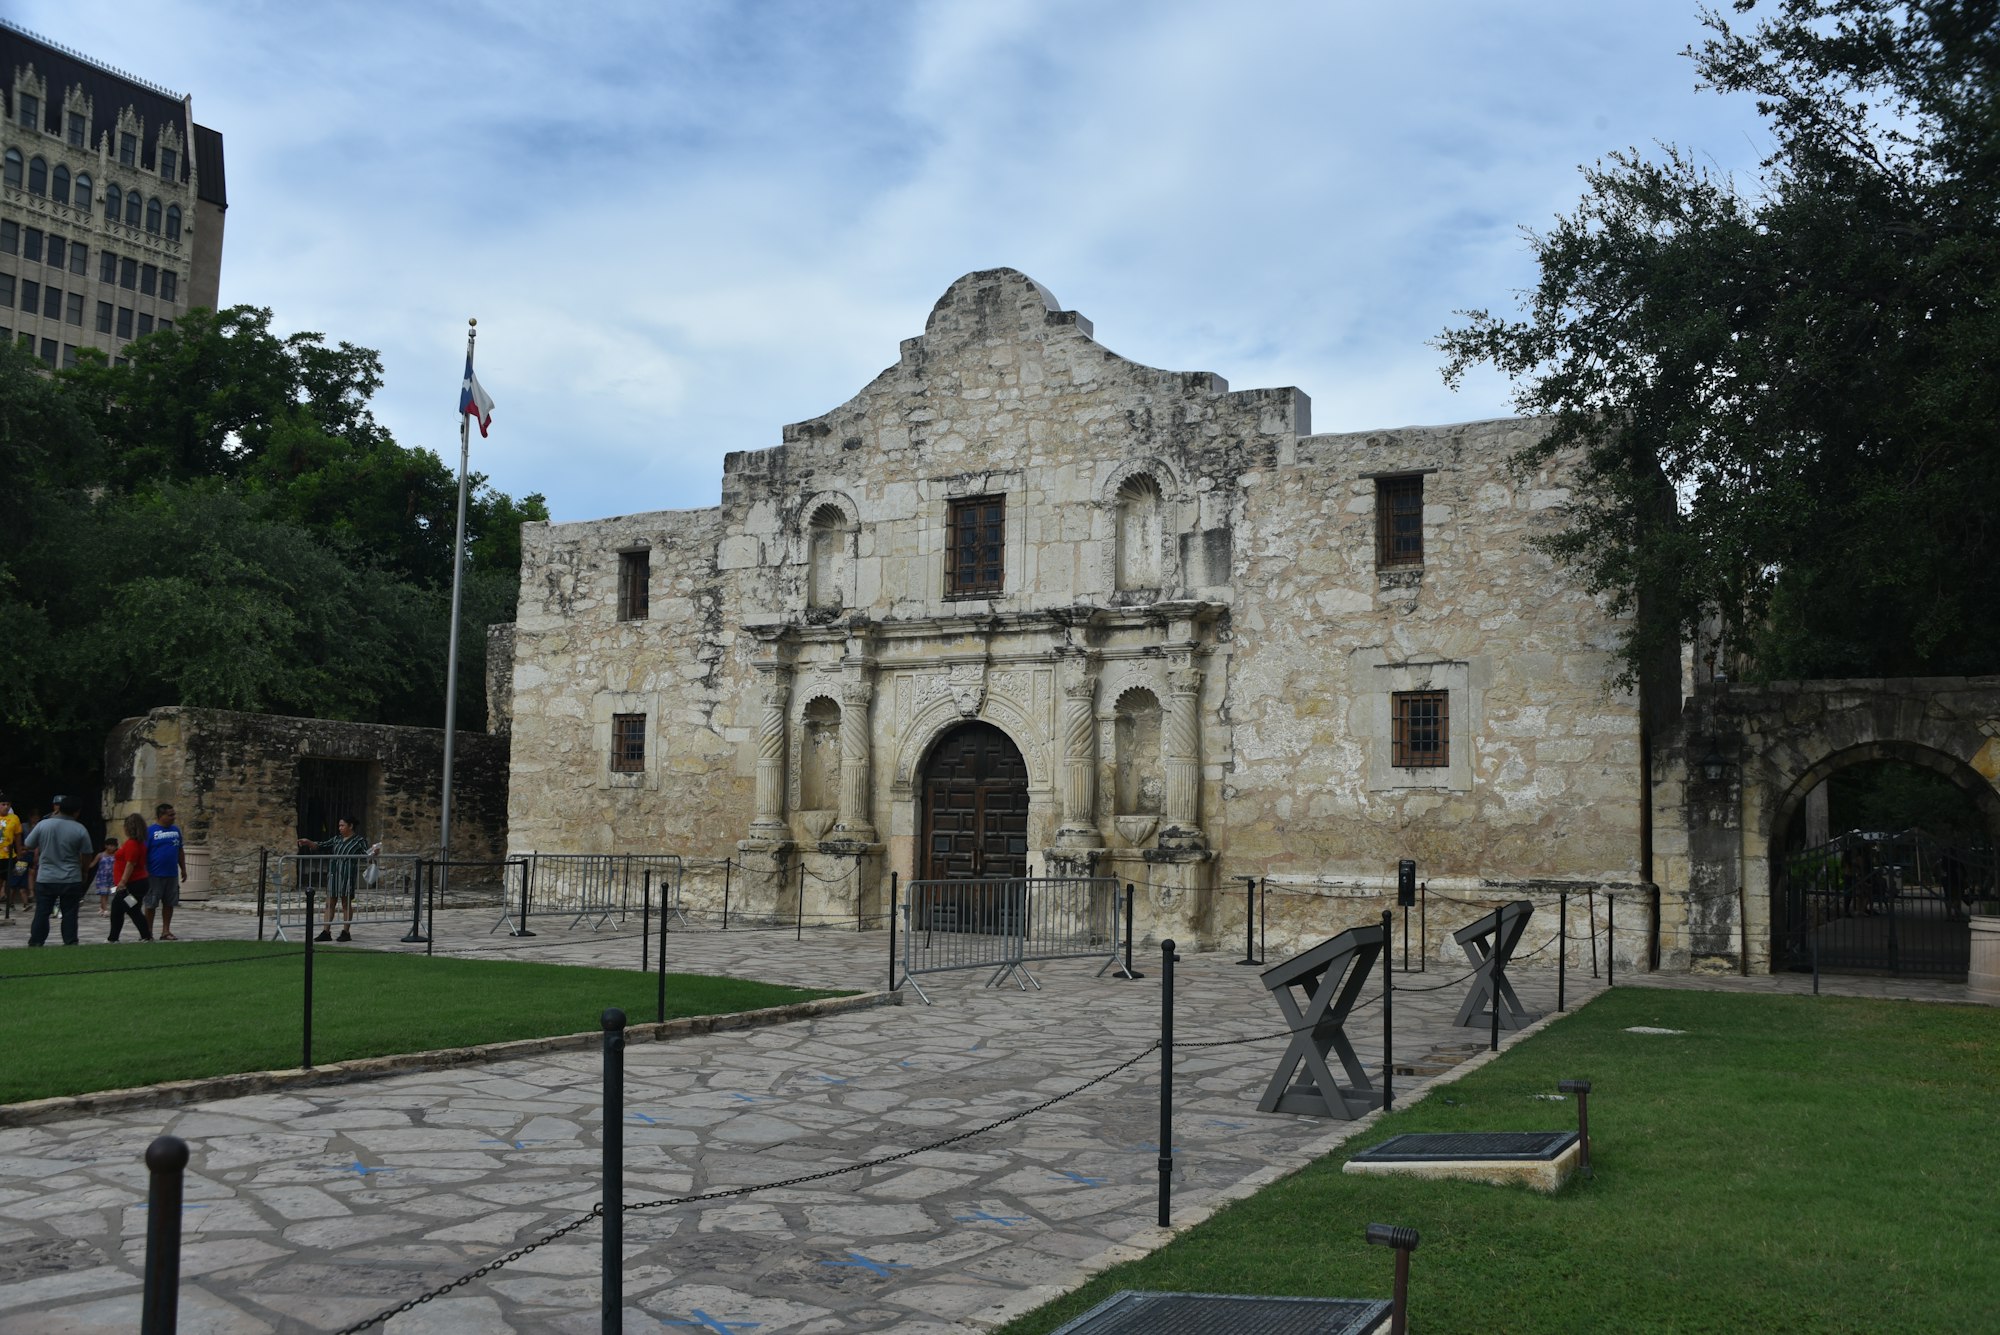 In 1836, The Battle Of The Alamo Took Place In Which State?